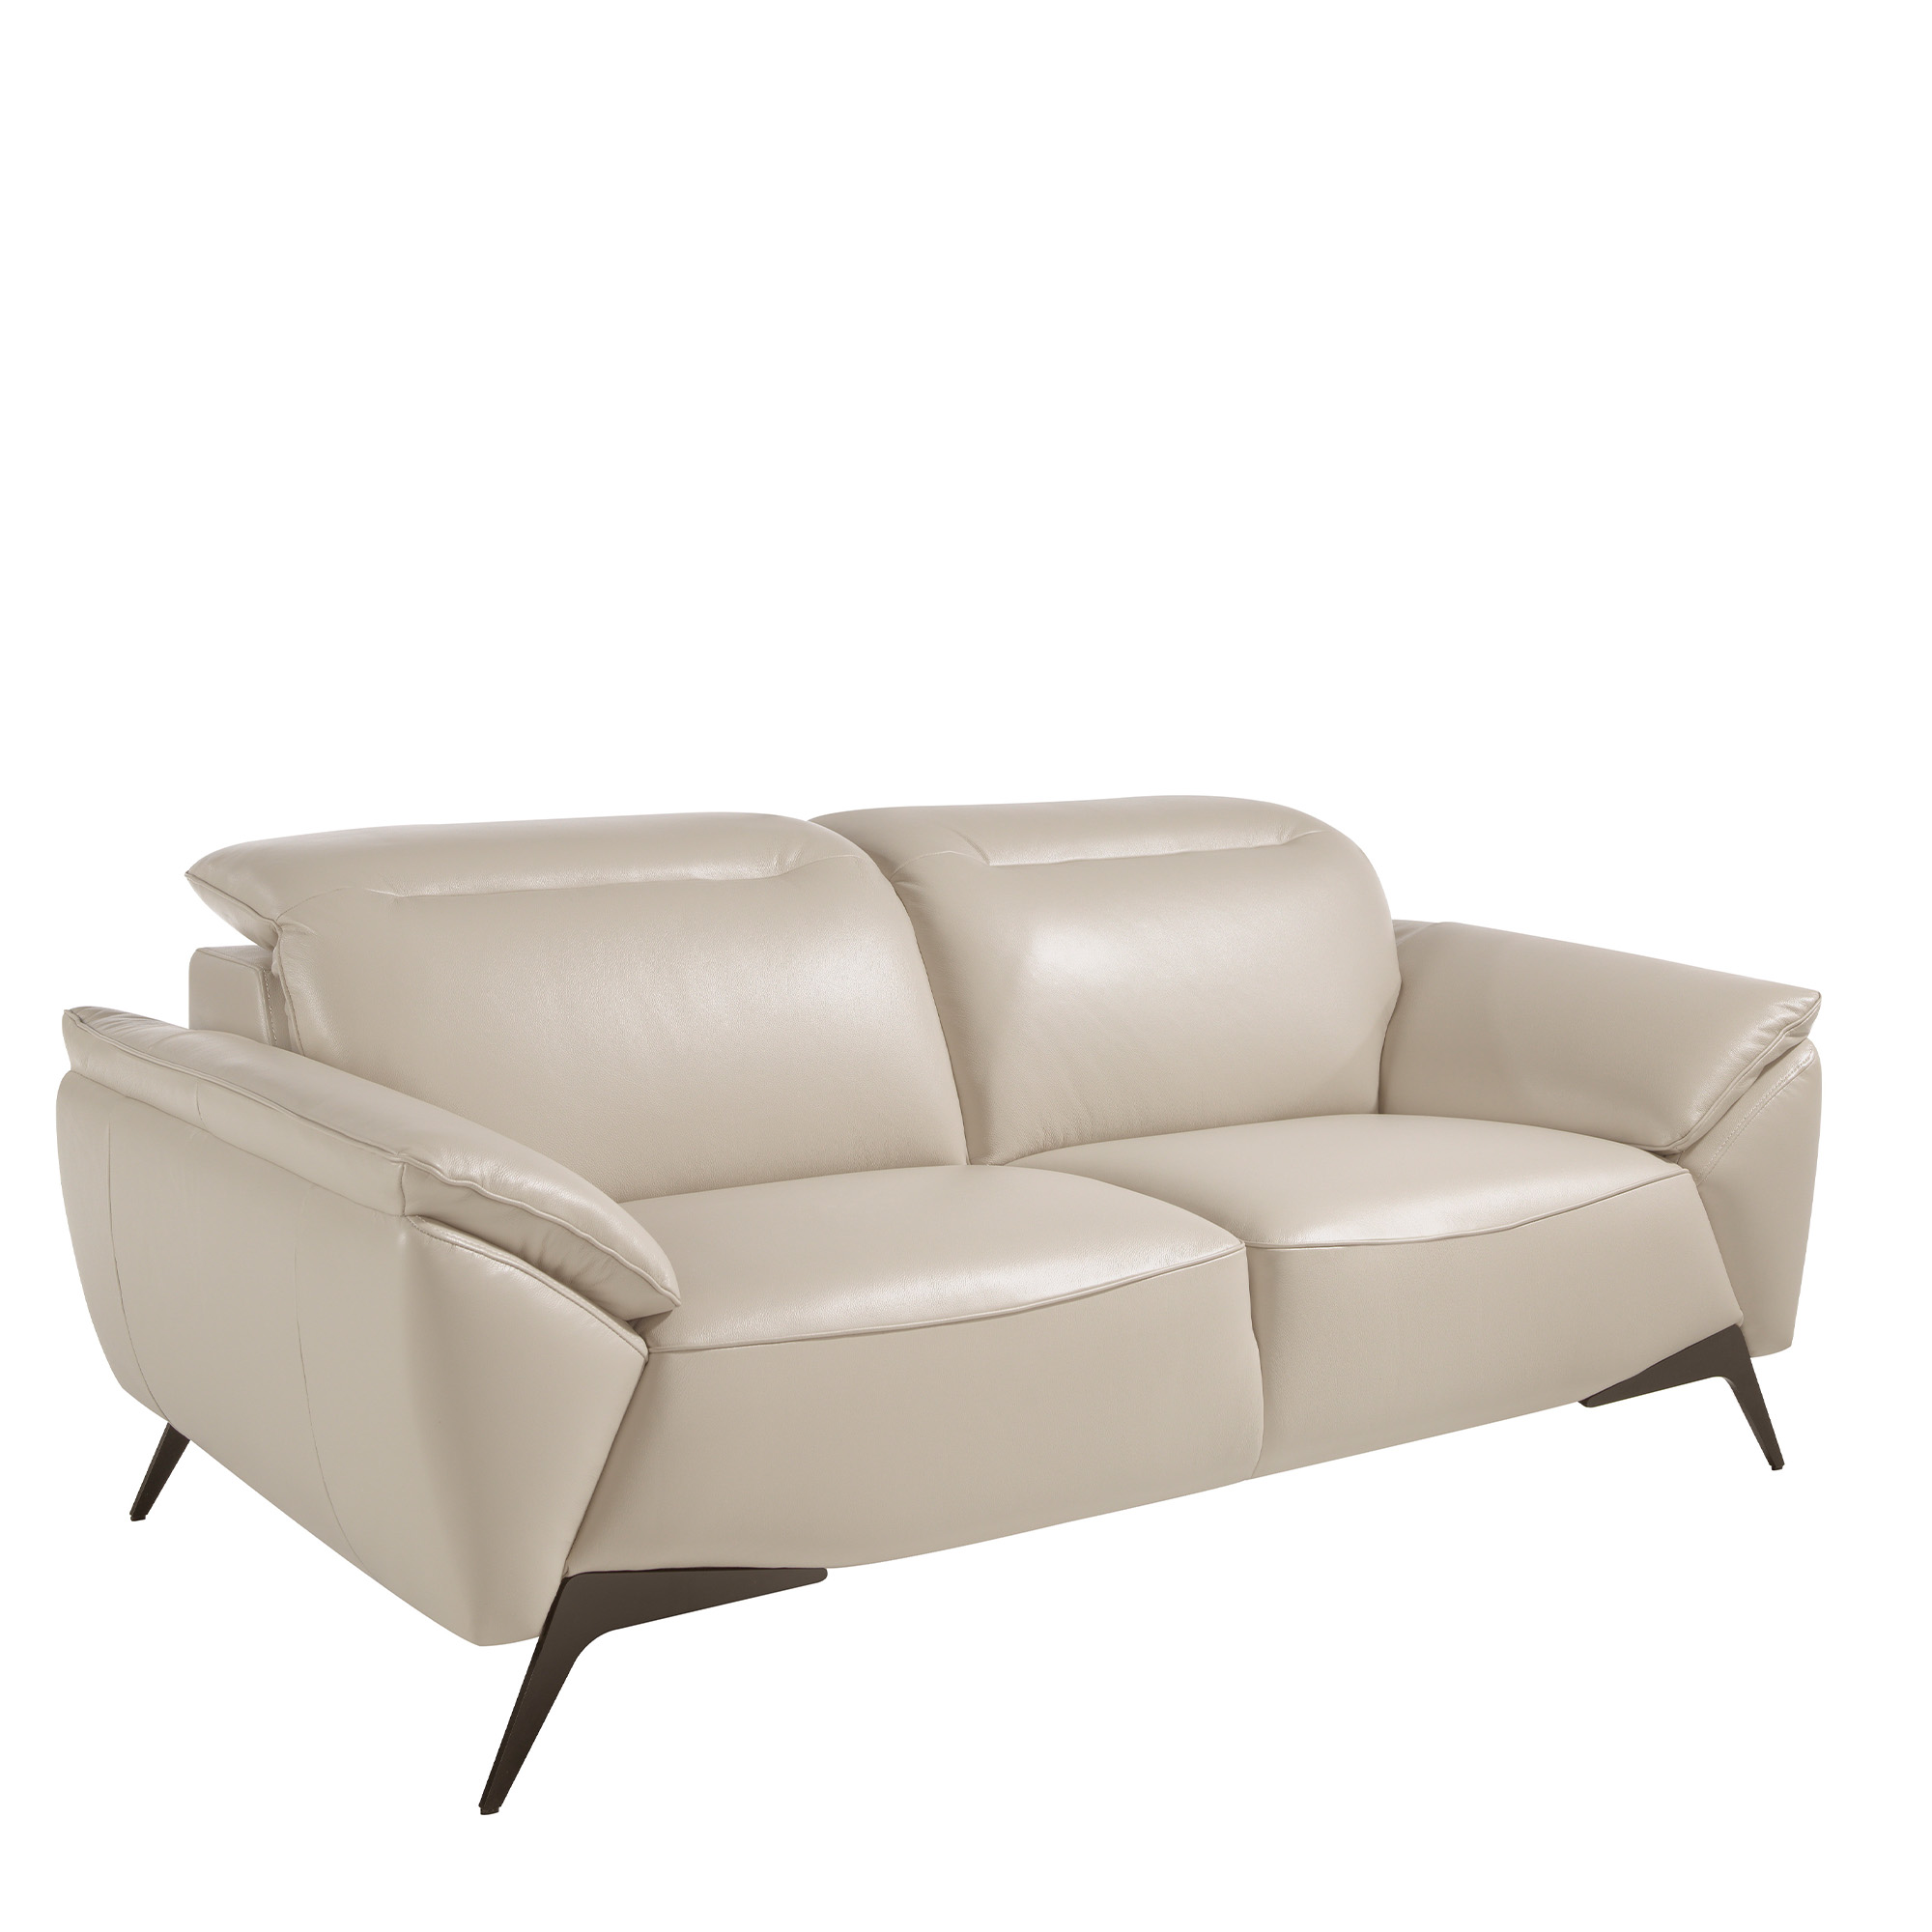 2 seater sofa upholstered in taupe grey leather with black steel legs